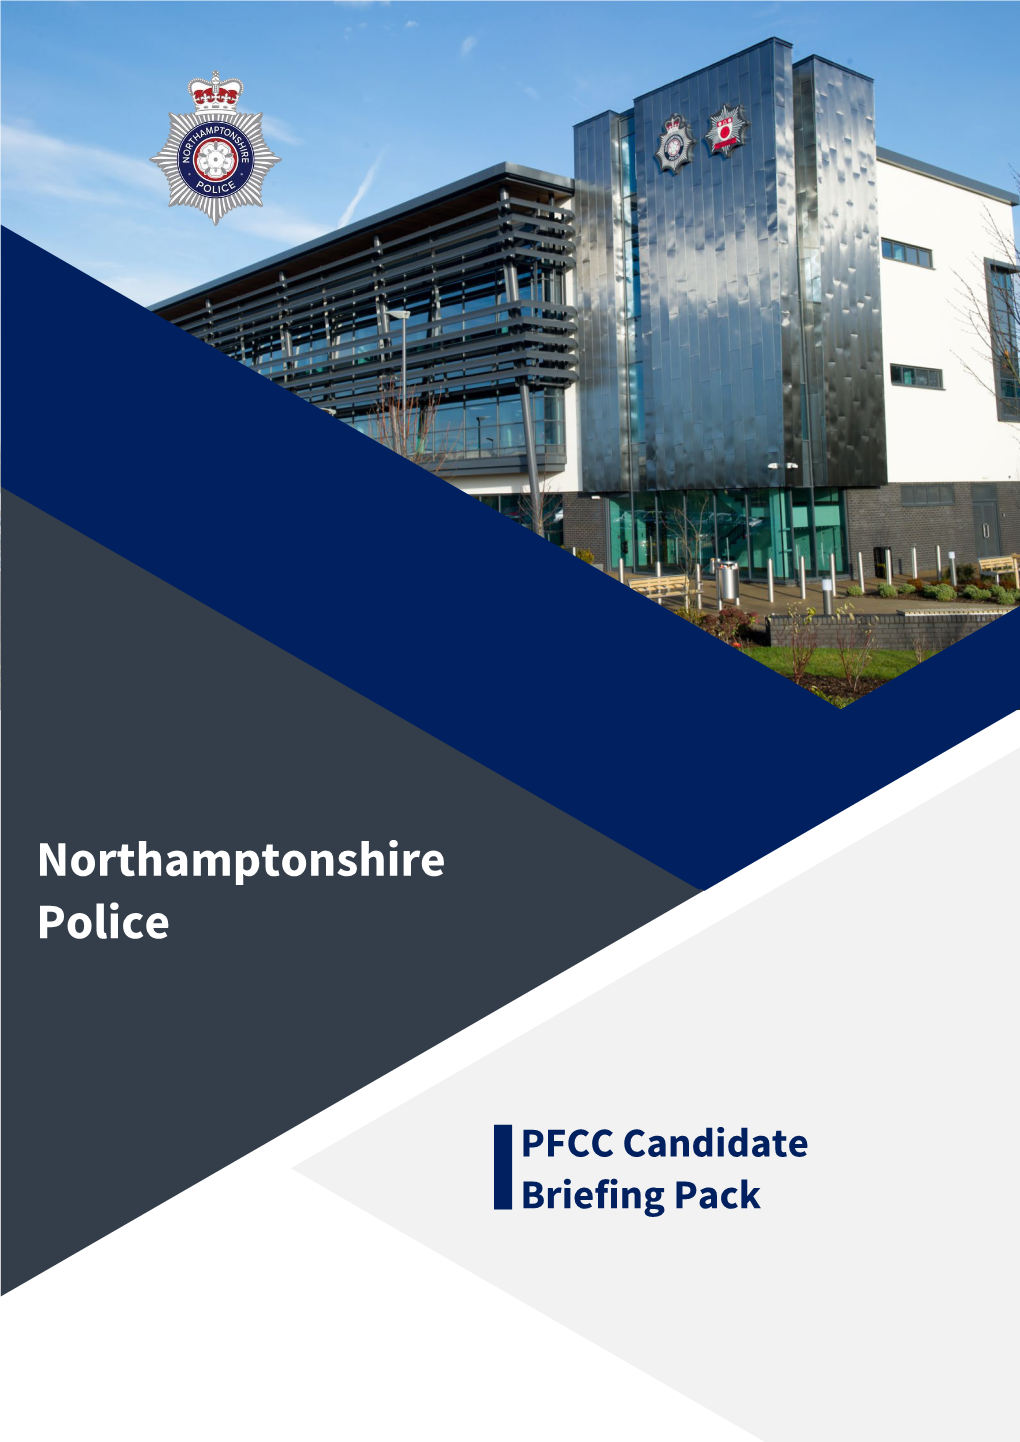 Here Is an Expectation That Pccs, Pfccs and Chief Constables Plan and Prepare Together Working